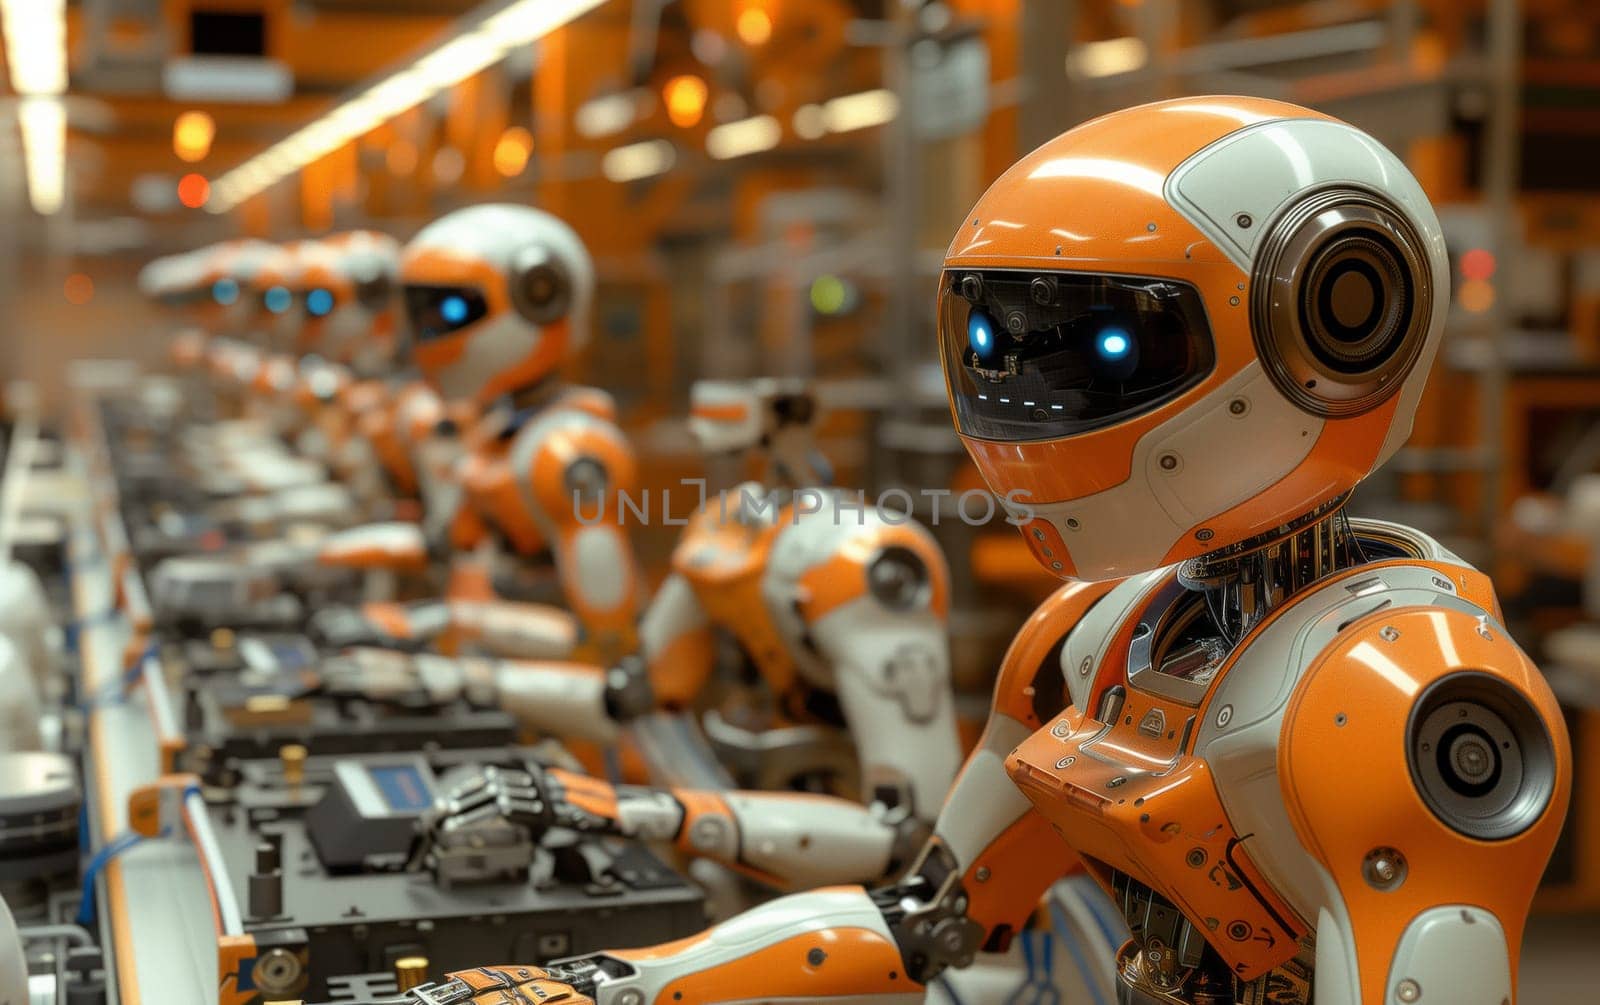 Robots in a factory assembling automotive parts on a conveyor belt by richwolf